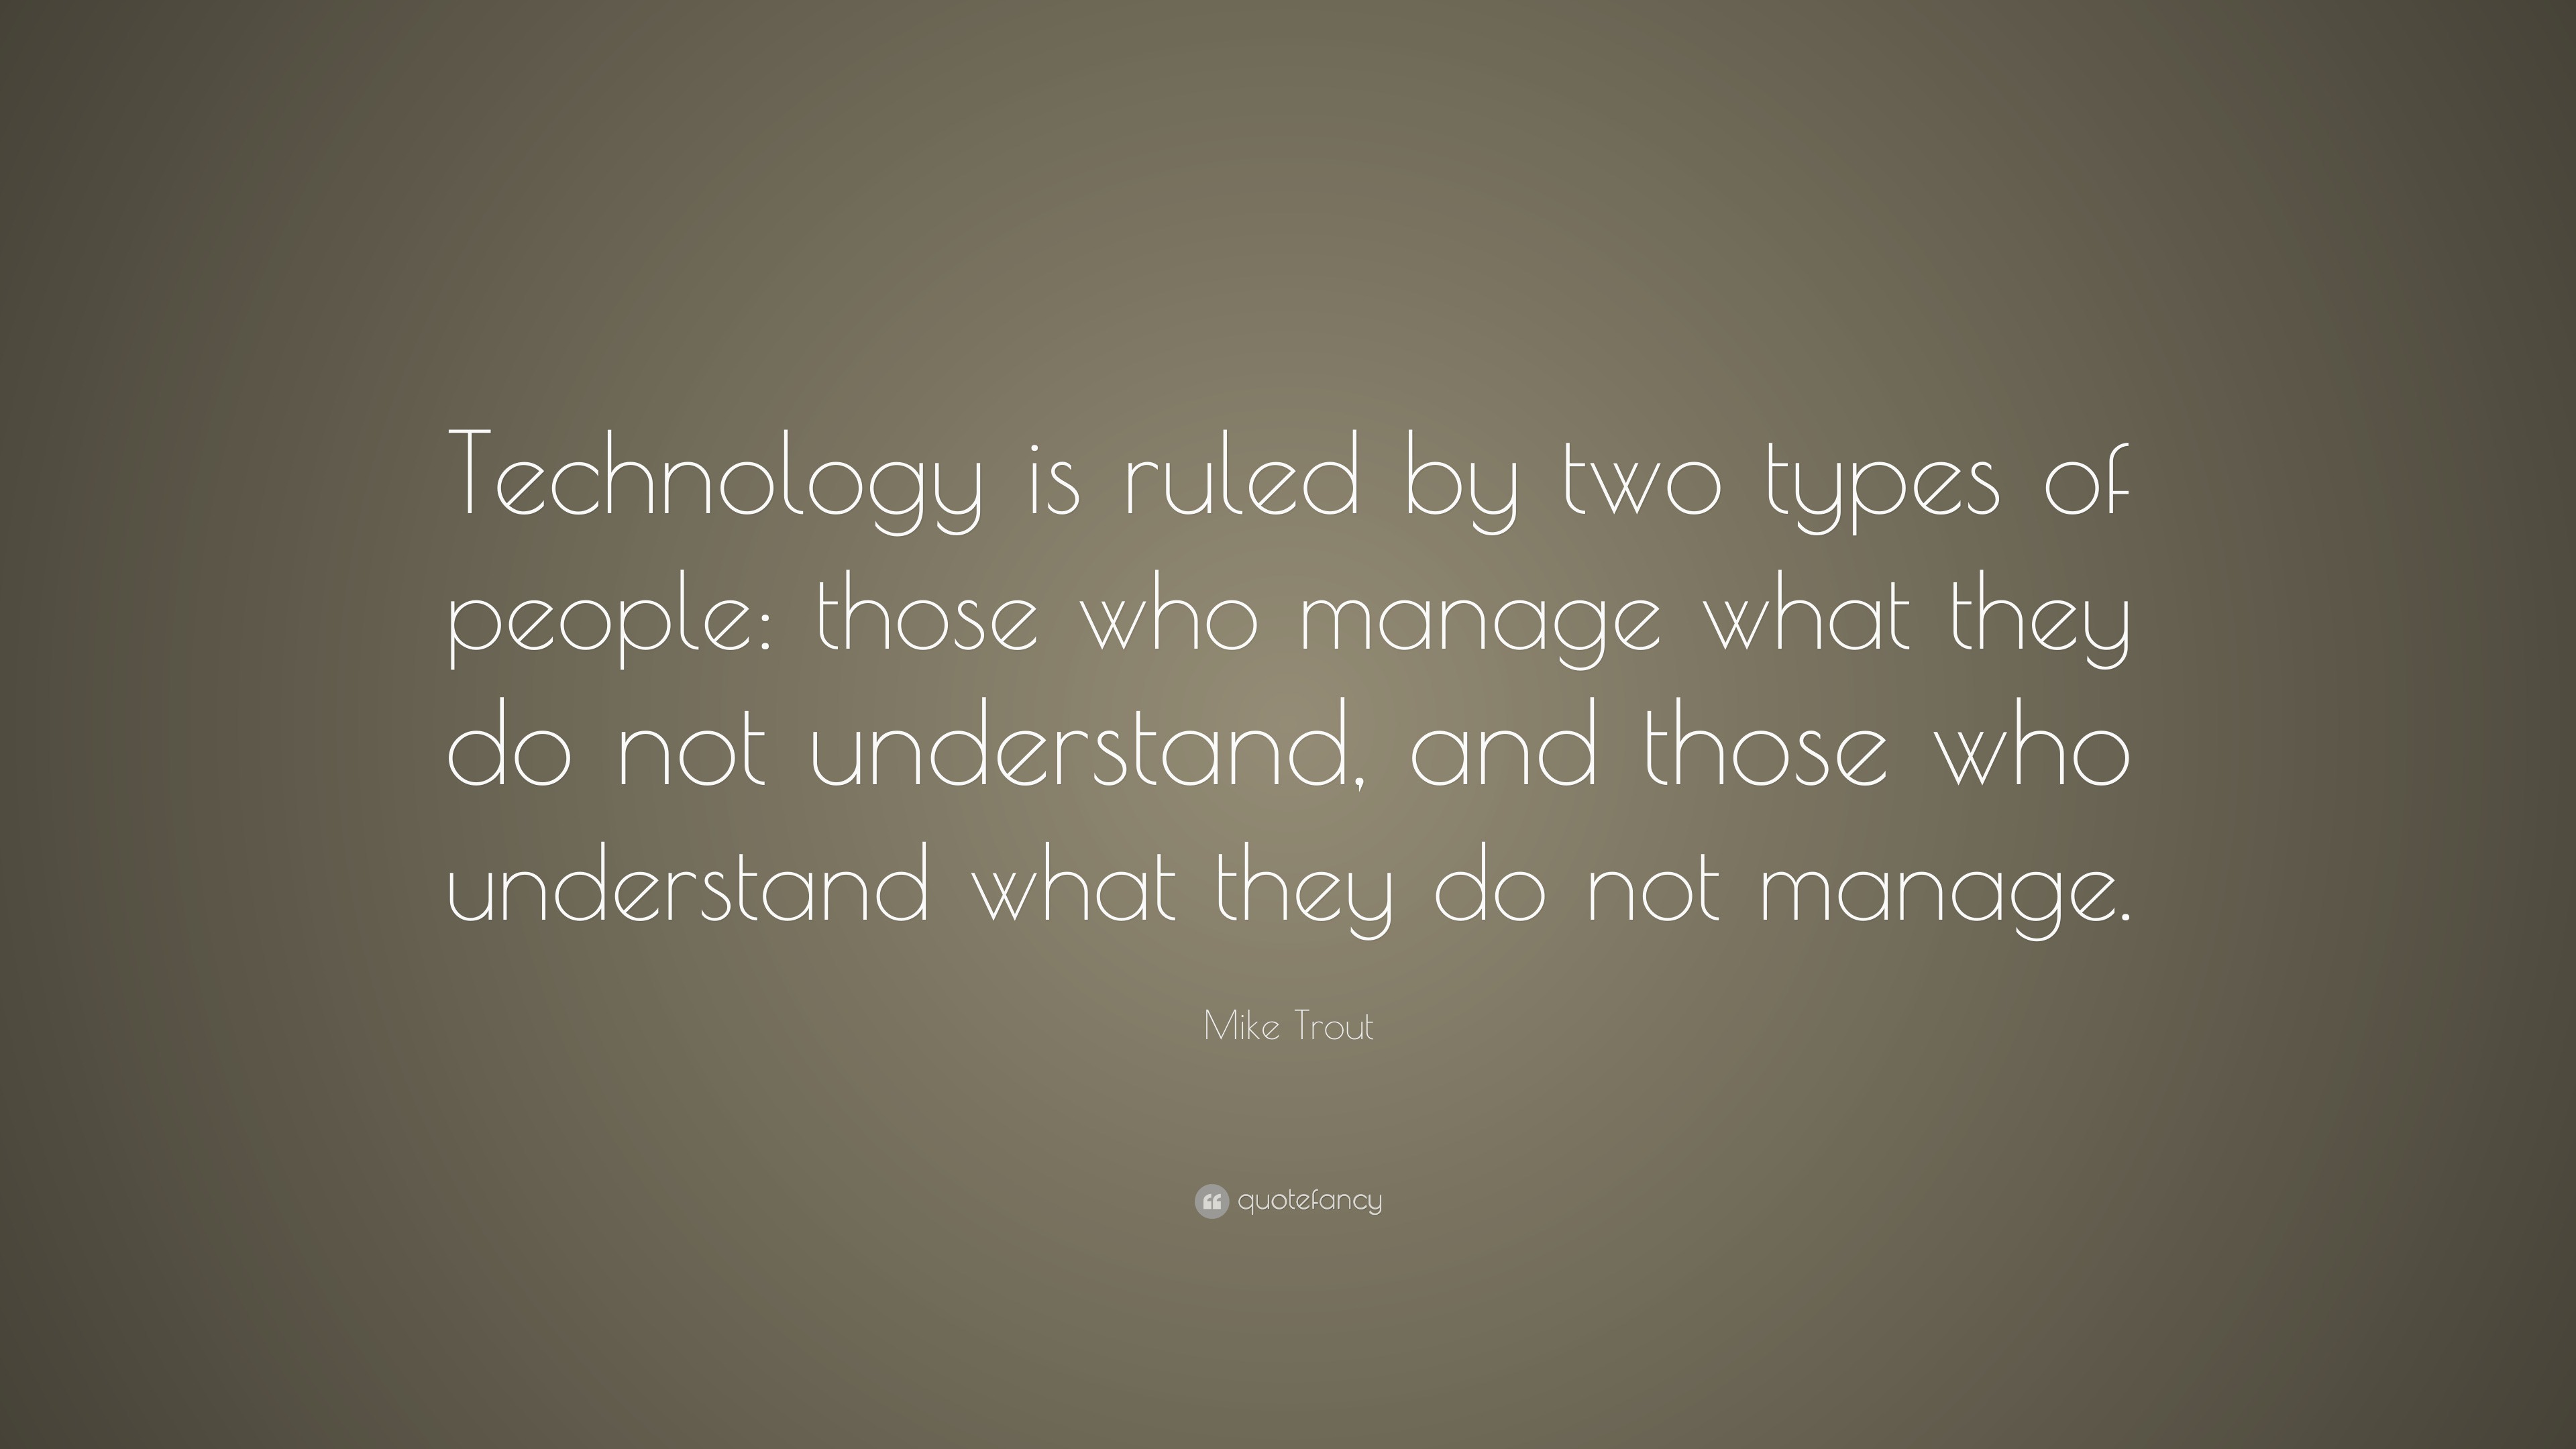 Mike Trout Quote: “Technology is ruled by two types of people: those ...